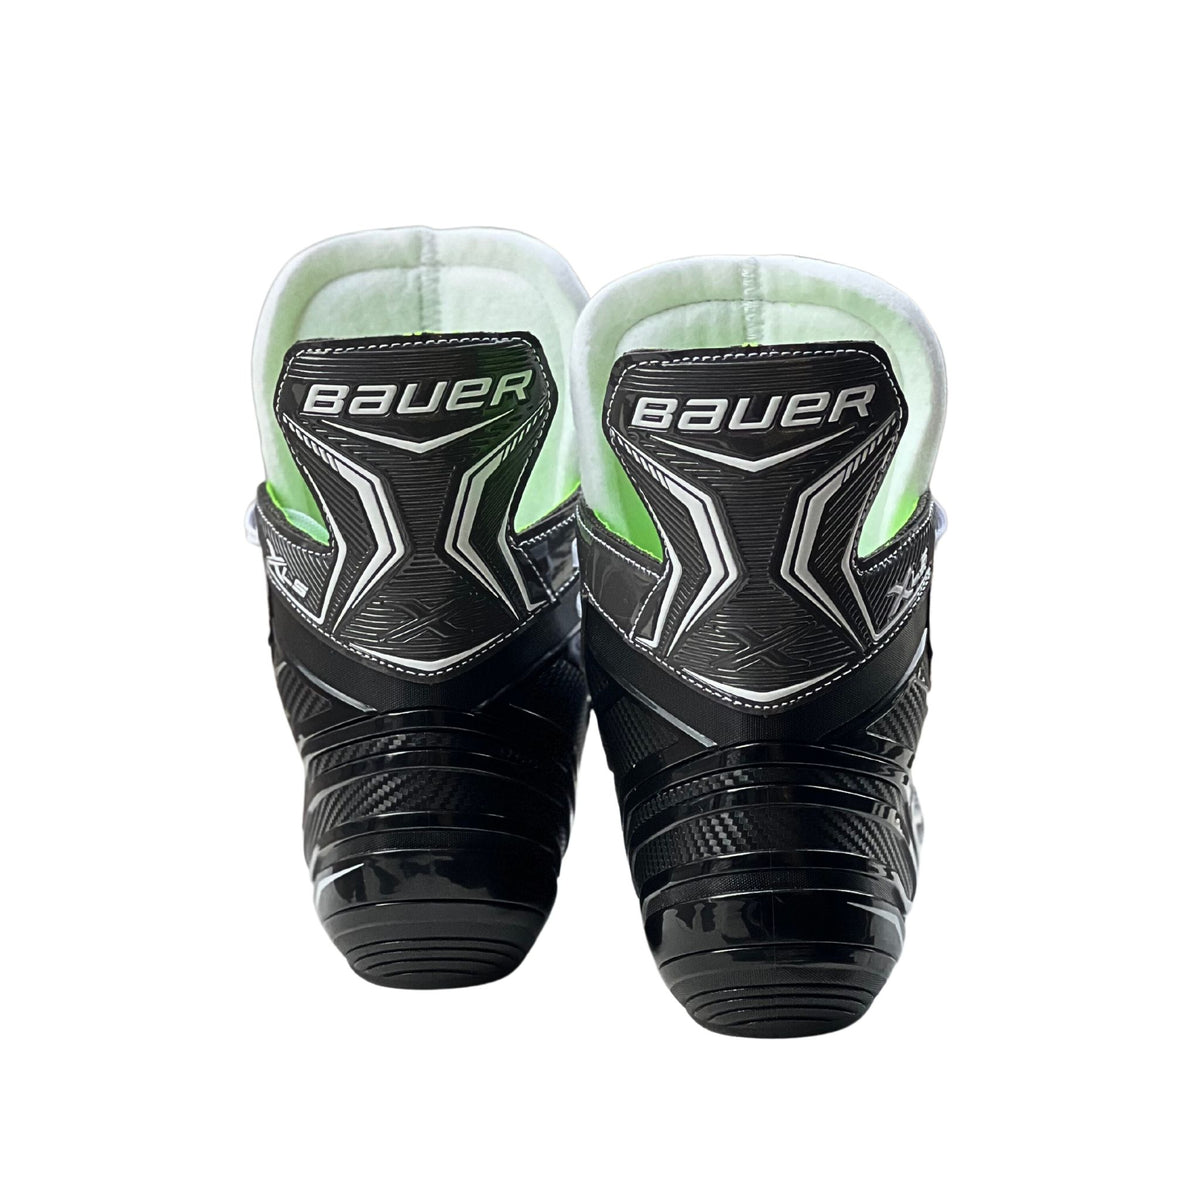 Bauer X-LS Boots - Pair of Boots only - Roller Skates | JT Skate